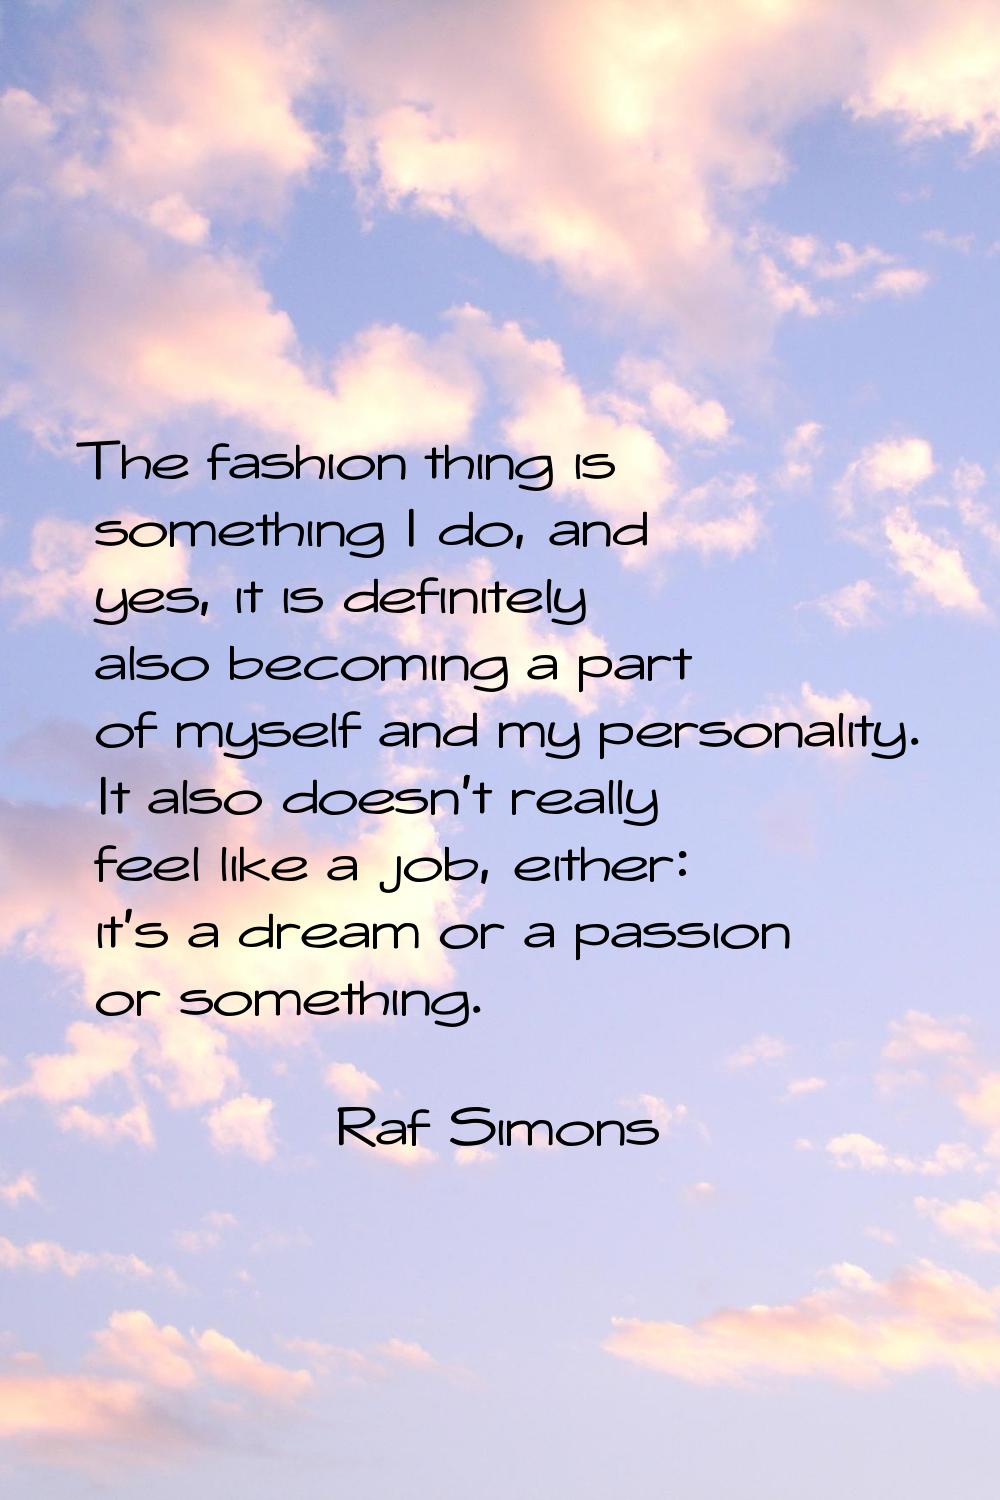 The fashion thing is something I do, and yes, it is definitely also becoming a part of myself and m